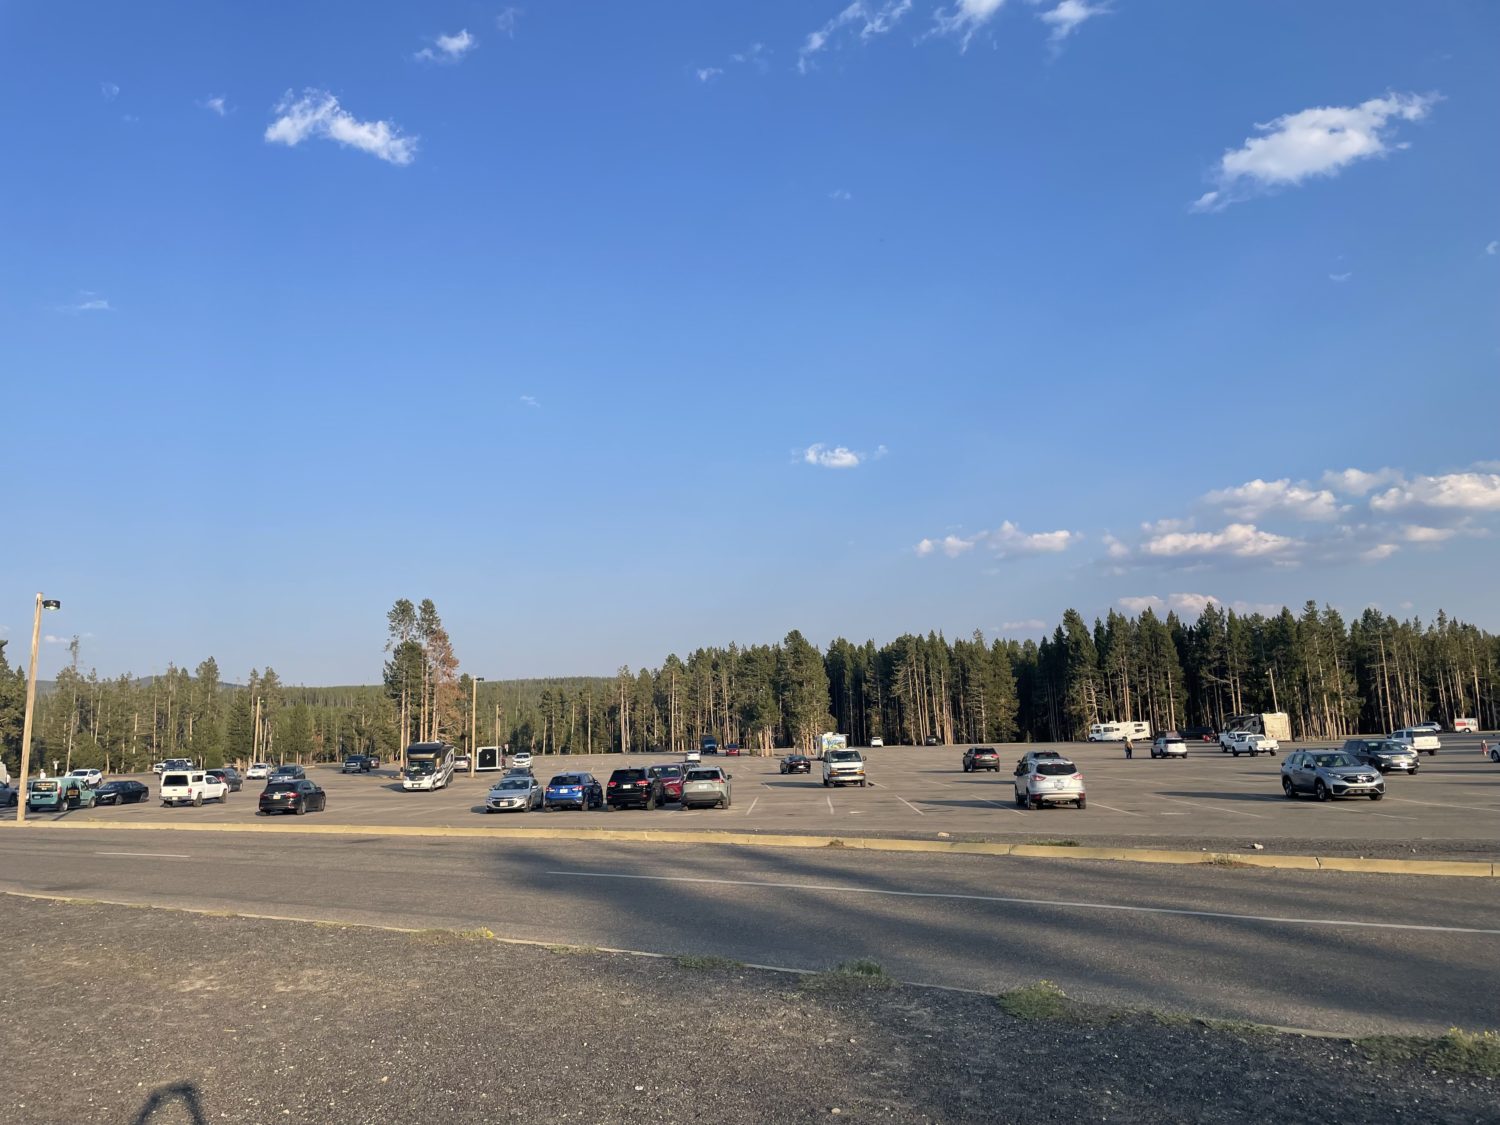 Old Faithful parking lots crowds